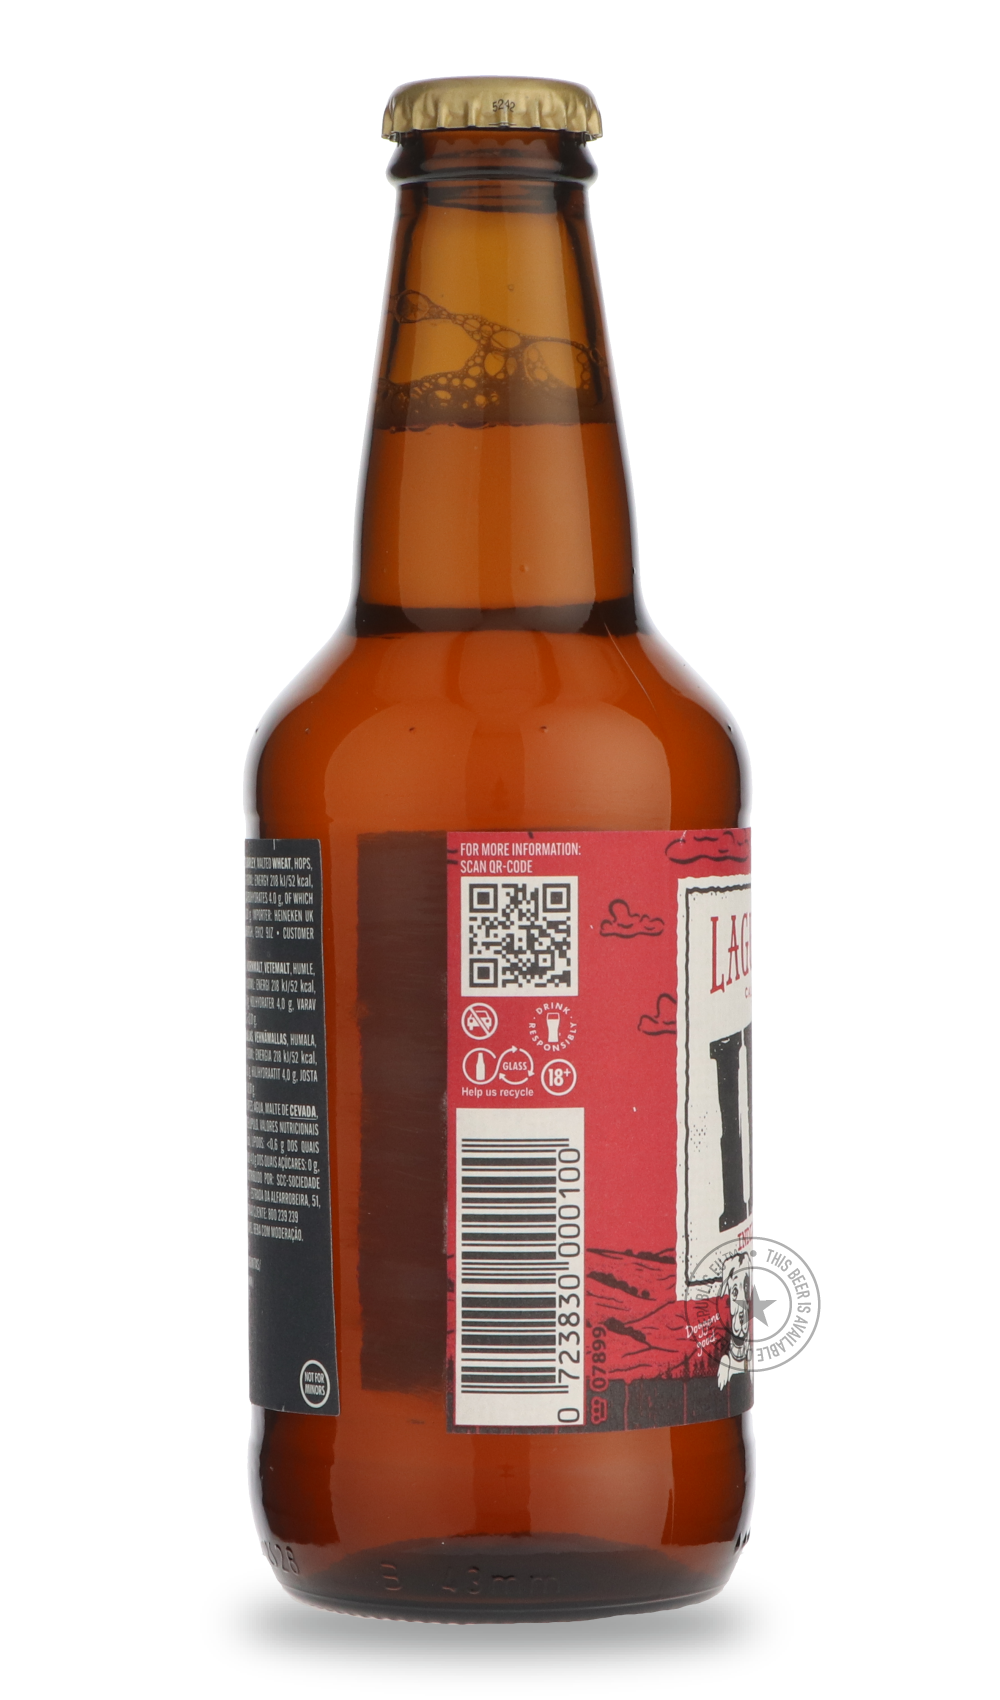 -Lagunitas- Lagunitas IPA-IPA- Only @ Beer Republic - The best online beer store for American & Canadian craft beer - Buy beer online from the USA and Canada - Bier online kopen - Amerikaans bier kopen - Craft beer store - Craft beer kopen - Amerikanisch bier kaufen - Bier online kaufen - Acheter biere online - IPA - Stout - Porter - New England IPA - Hazy IPA - Imperial Stout - Barrel Aged - Barrel Aged Imperial Stout - Brown - Dark beer - Blond - Blonde - Pilsner - Lager - Wheat - Weizen - Amber - Barley 